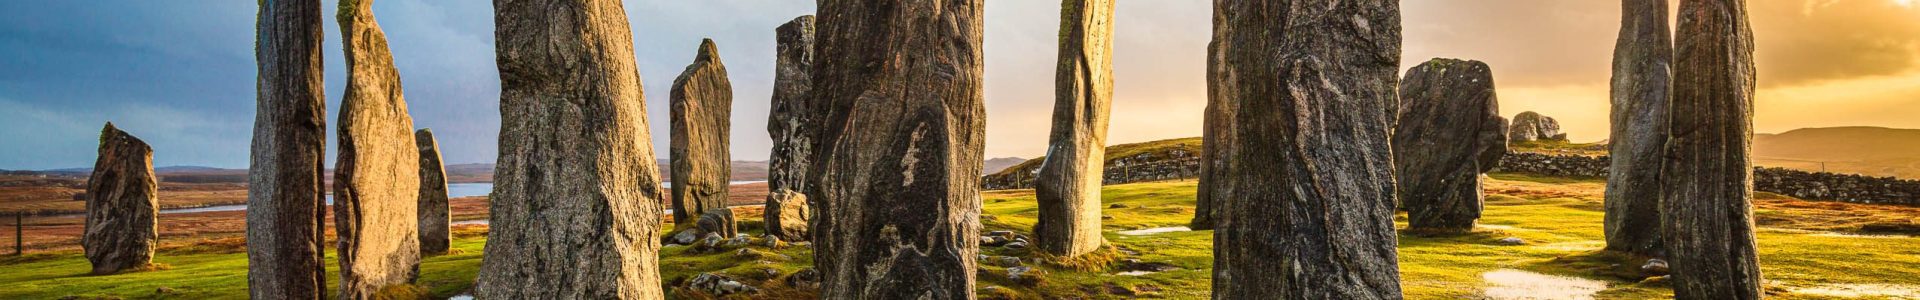 Standing stones at Calanais, Isle of Lewis, Outer Hebrides, Scotland. HB012